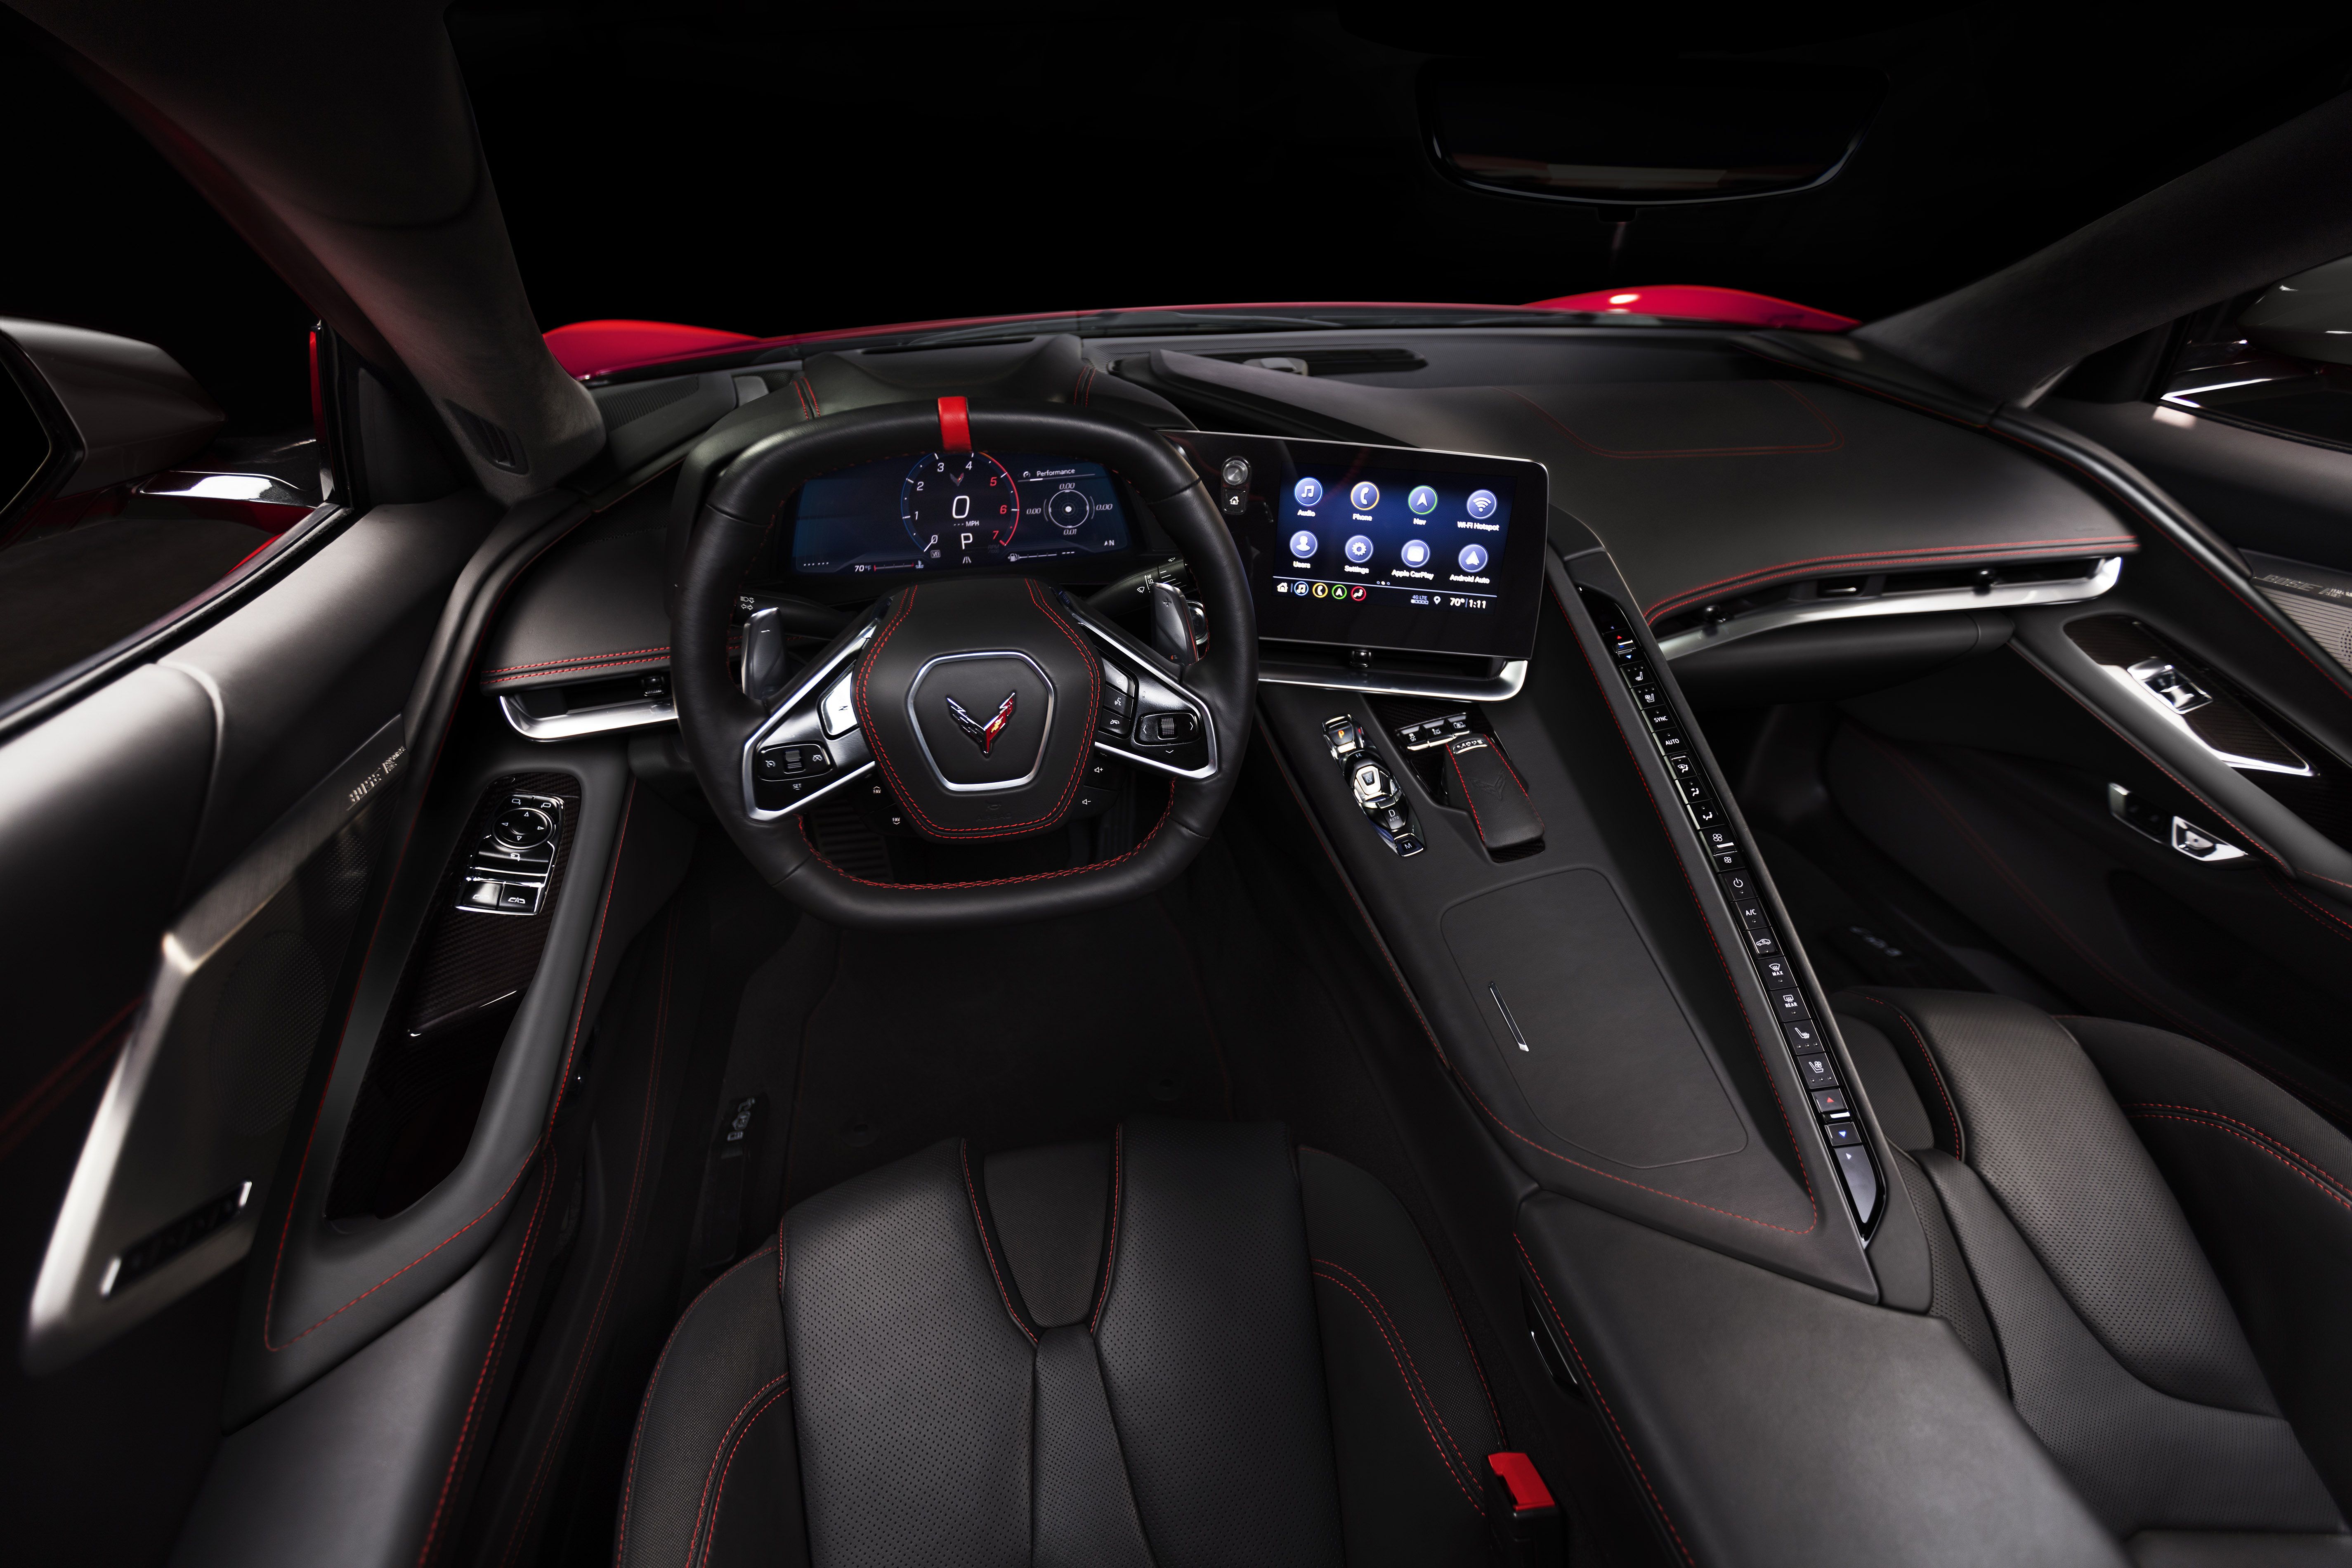 Spend The Day Building 2020 Corvette Stingray Of Your Dreams With New  Configurator | Carscoops